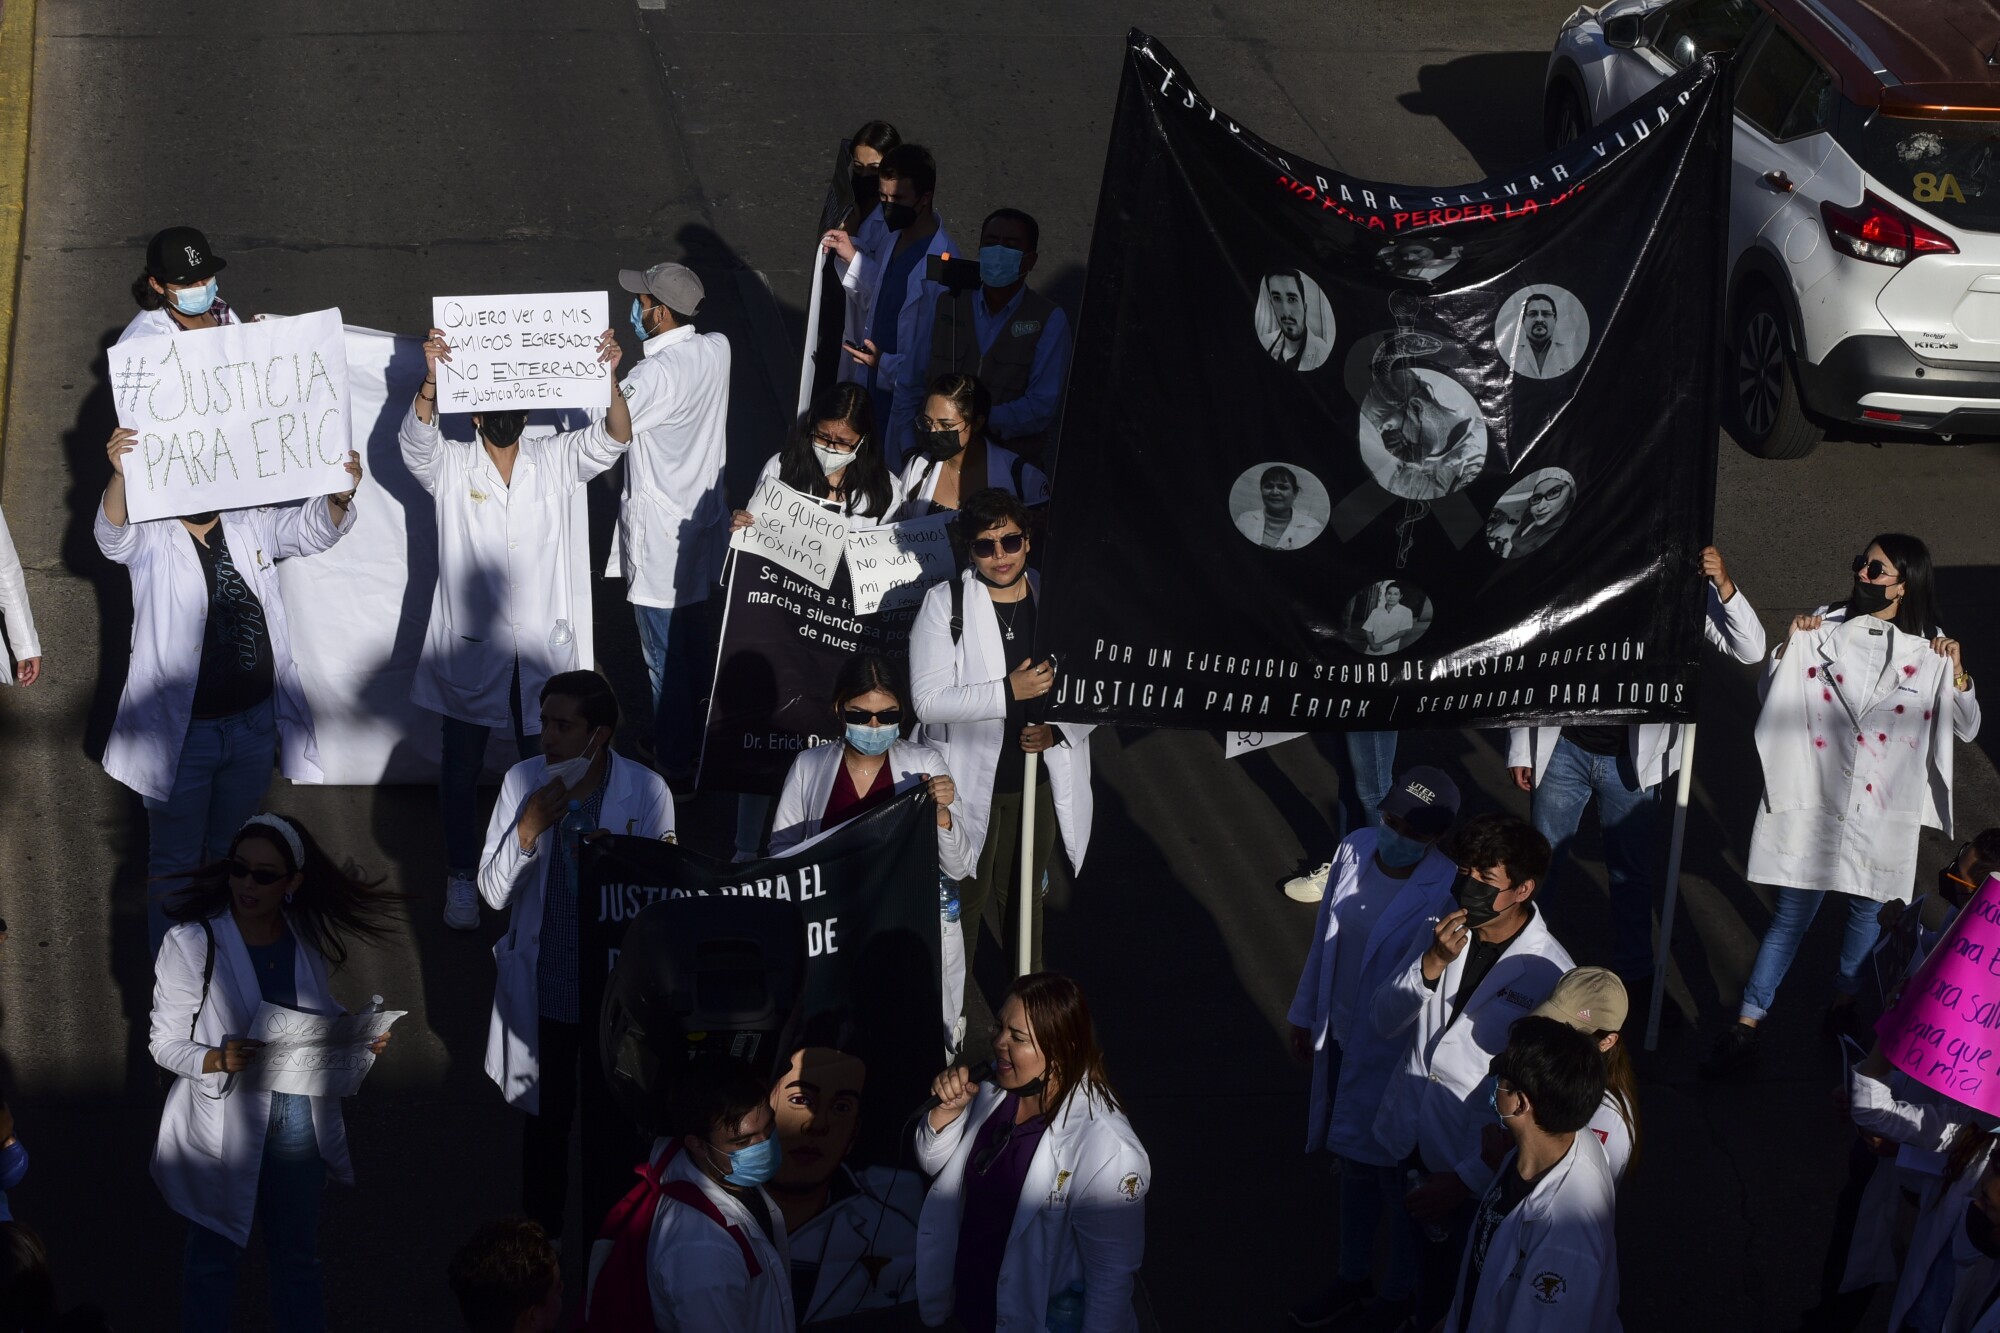 Medical students take to the streets to protest 